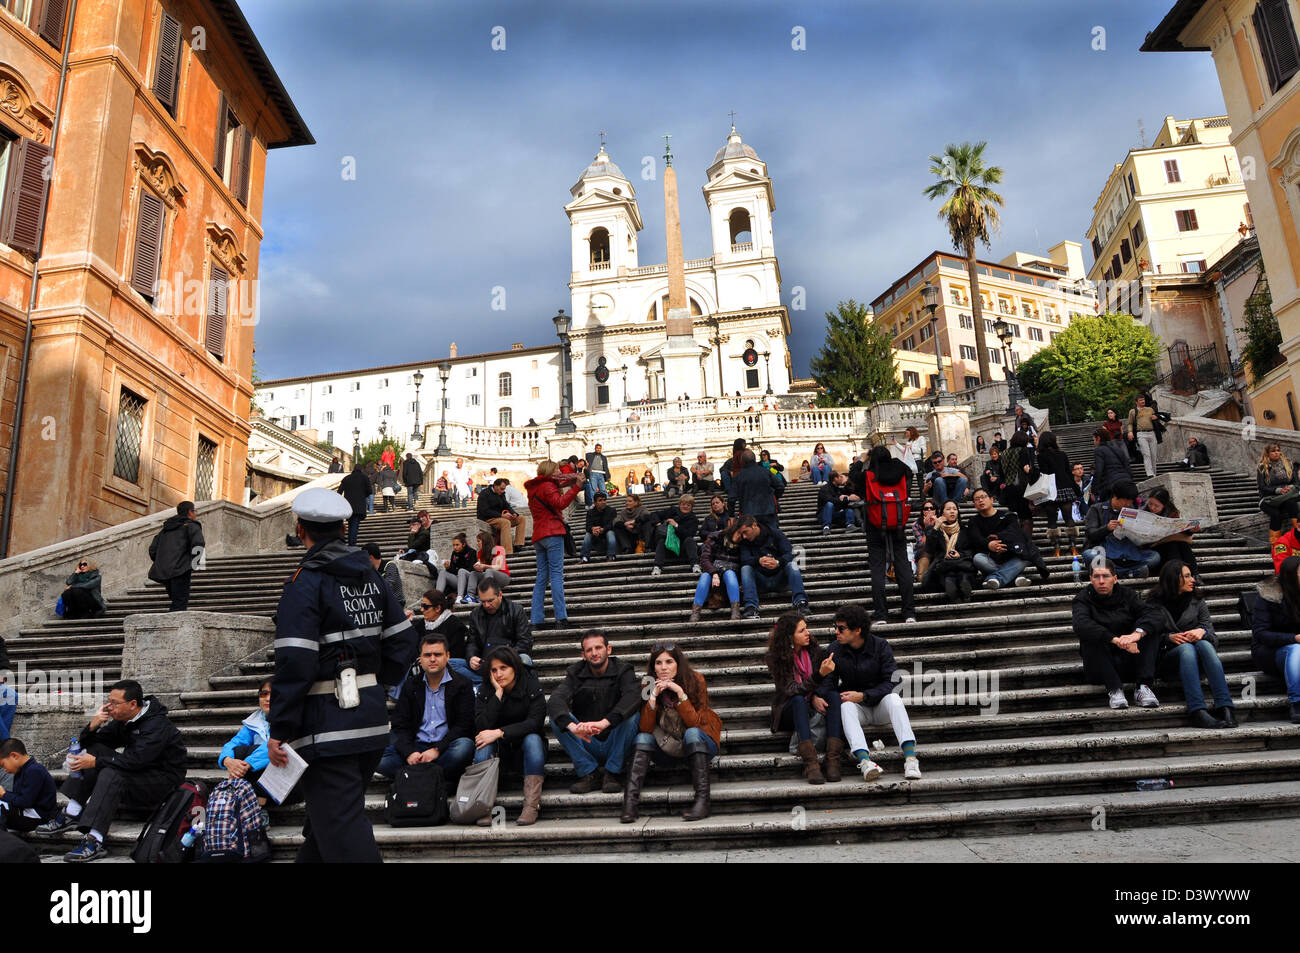 Crowds enjoy the Autumn sunshine at the Spanish Steps, Piazza di Spagna, Rome, Italy. Stock Photo